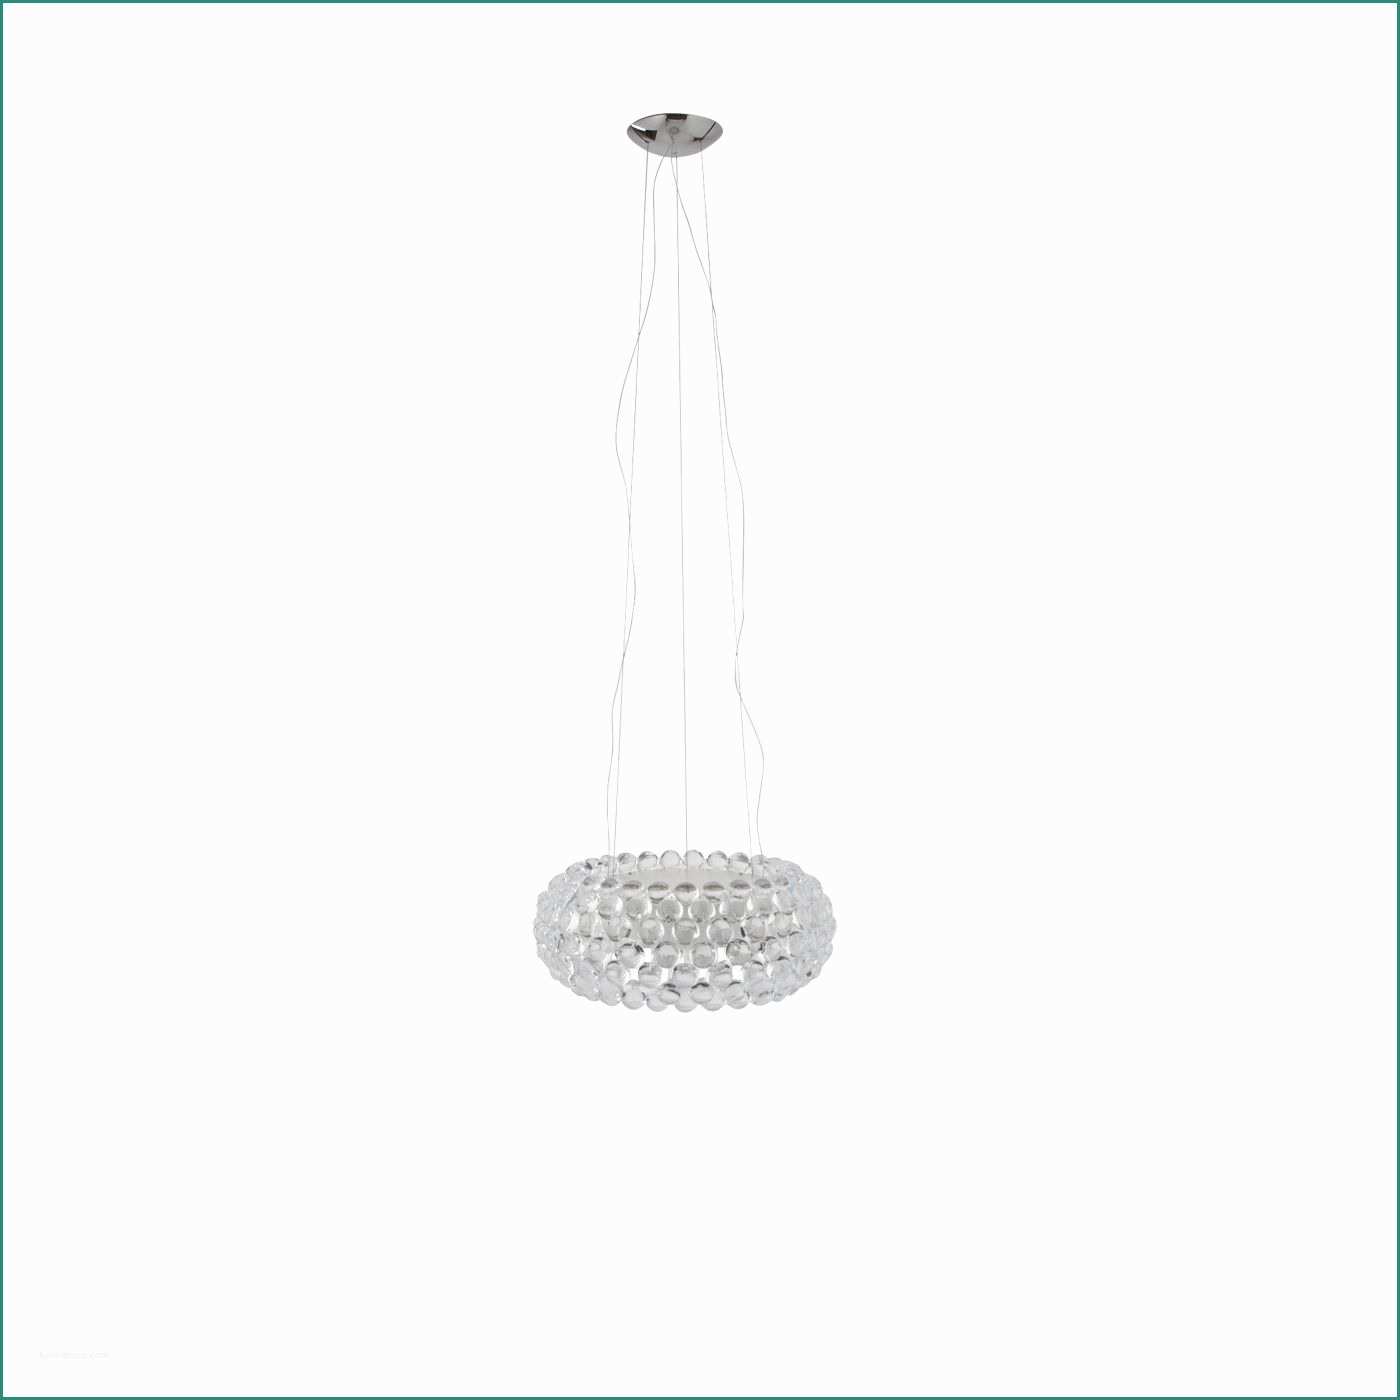 Lampada Led Rs Mm Dimmerabile E Caboche Media Stunning Foscarini Caboche Lamp Suspended with